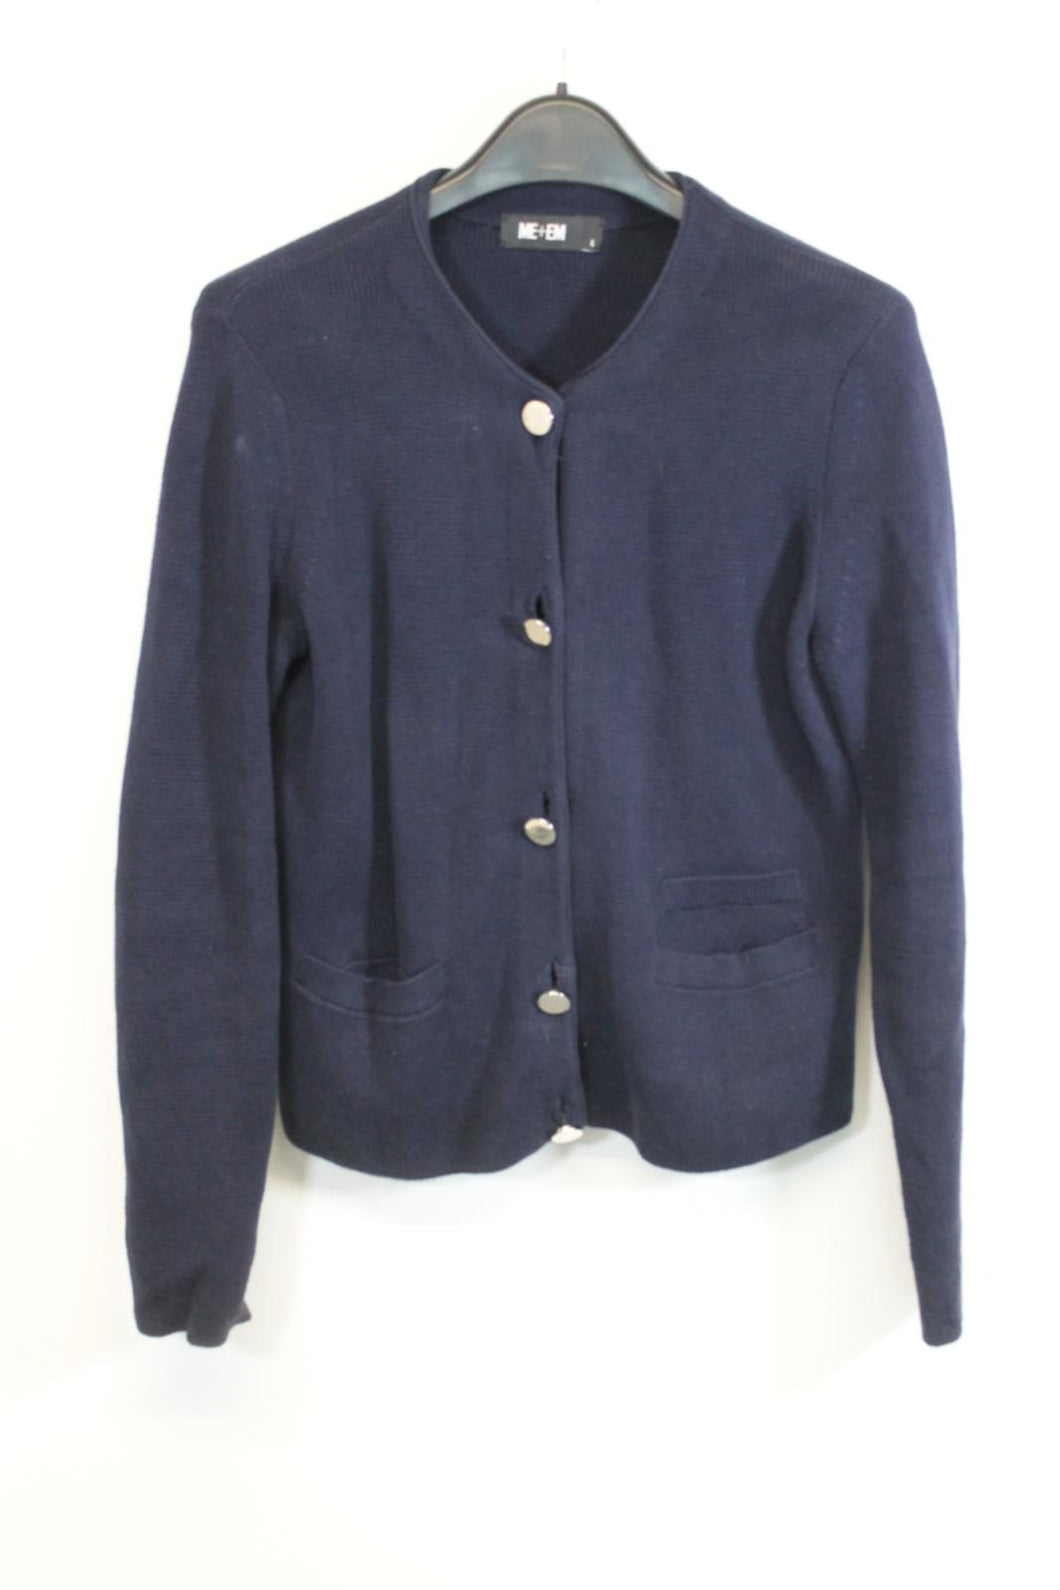 ME+EM Ladies Navy Blue Cotton Long Sleeve Knitted Cardigan Size L